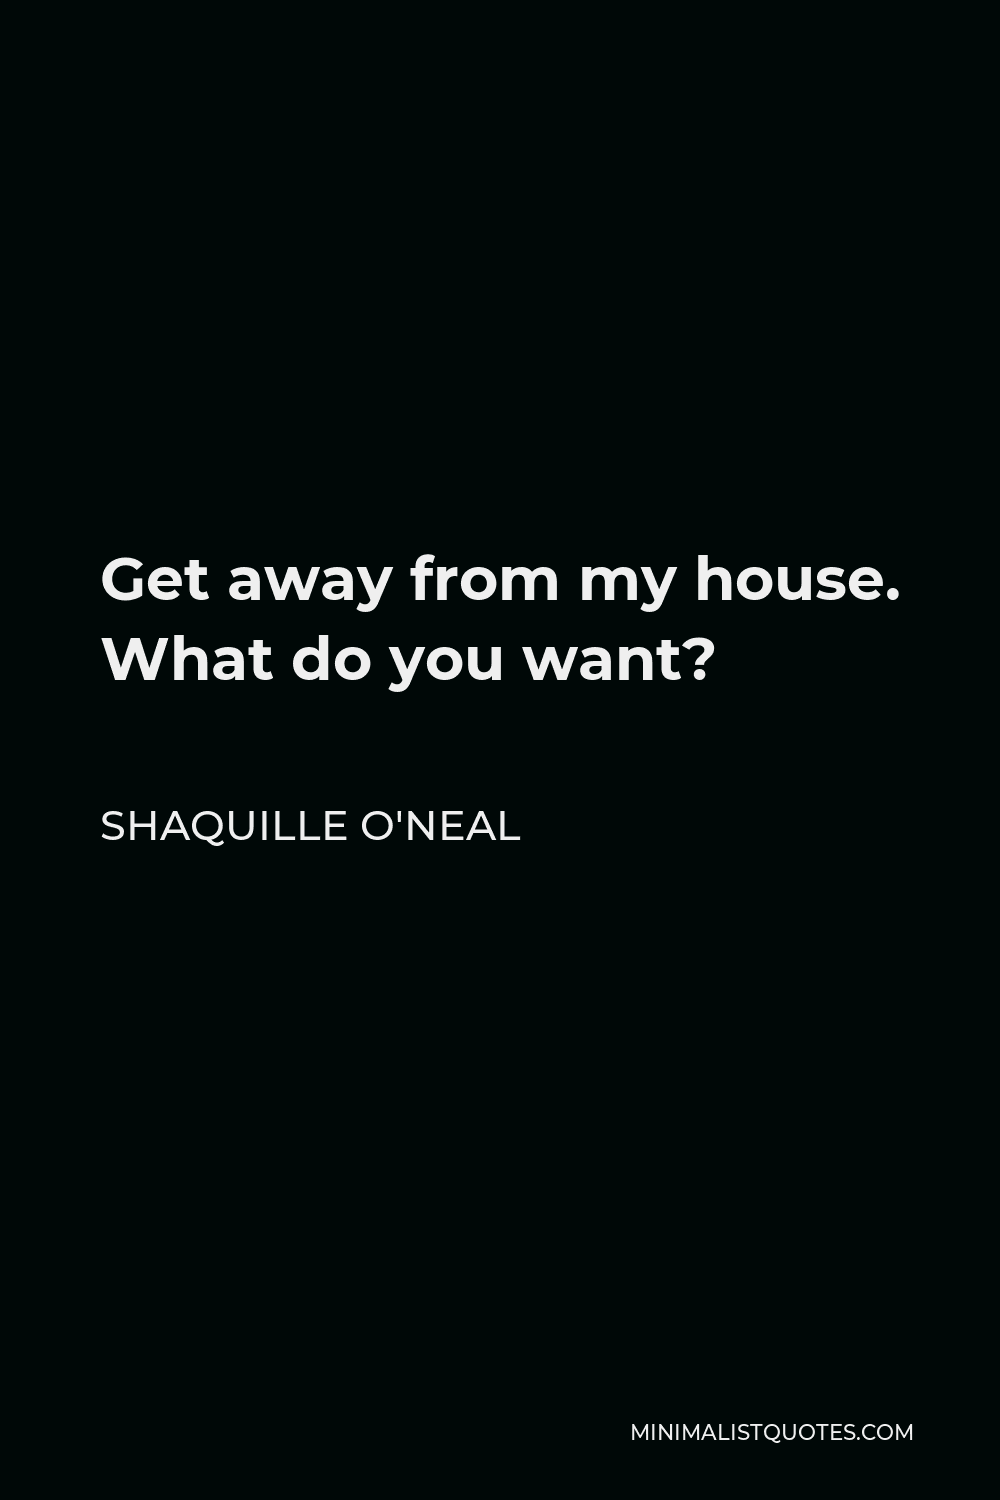 Shaquille O'Neal Quote - Get away from my house. What do you want?